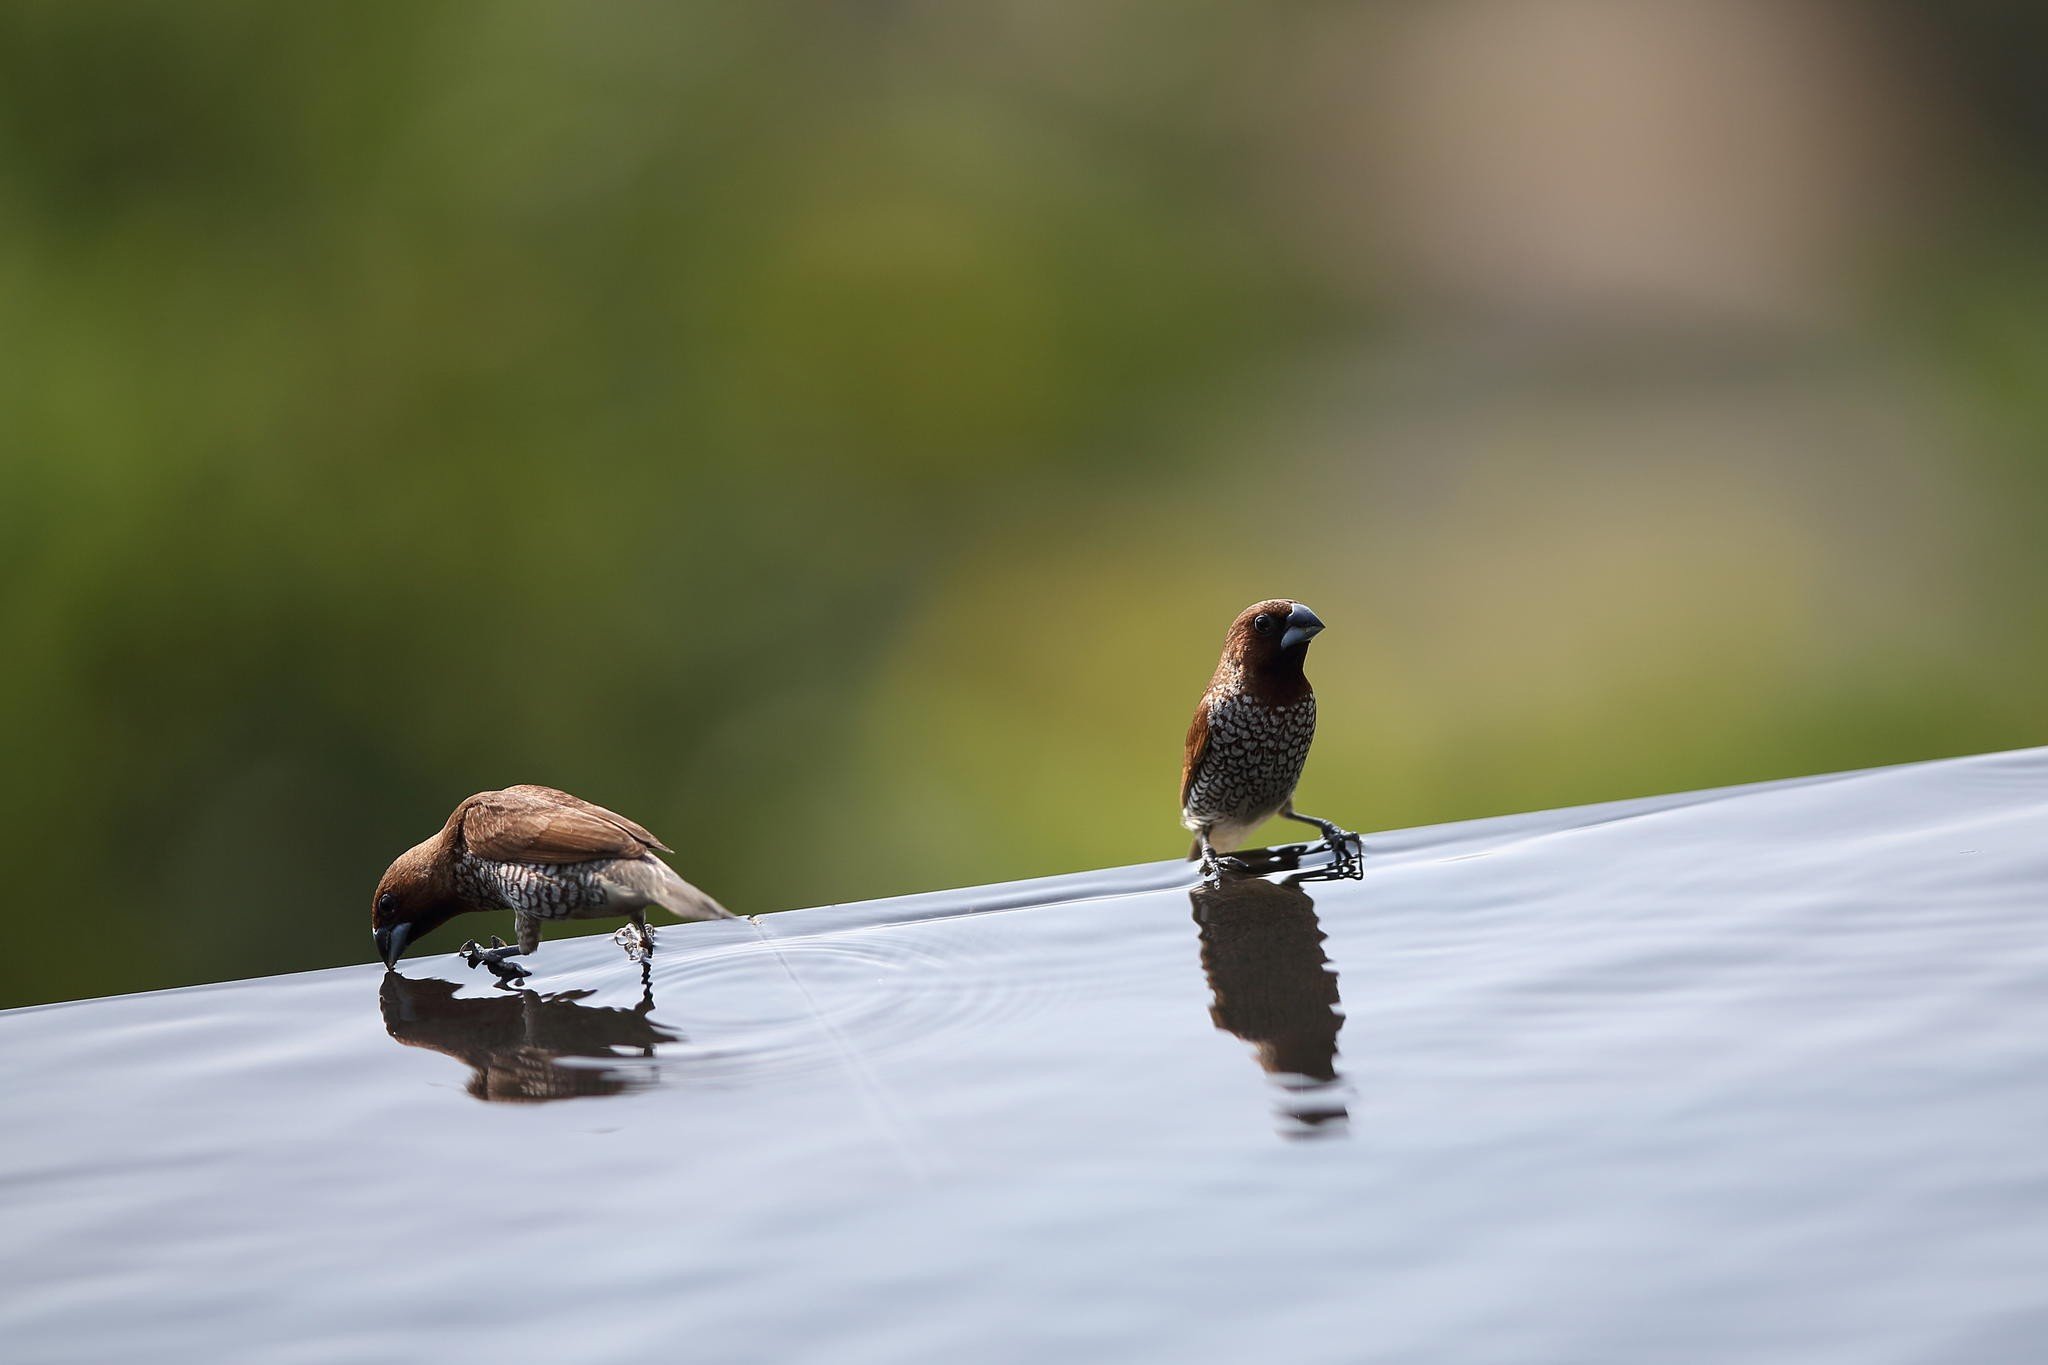 photography, Macro, Depth of field, Sparrow, Water, Drink, Reflection Wallpaper